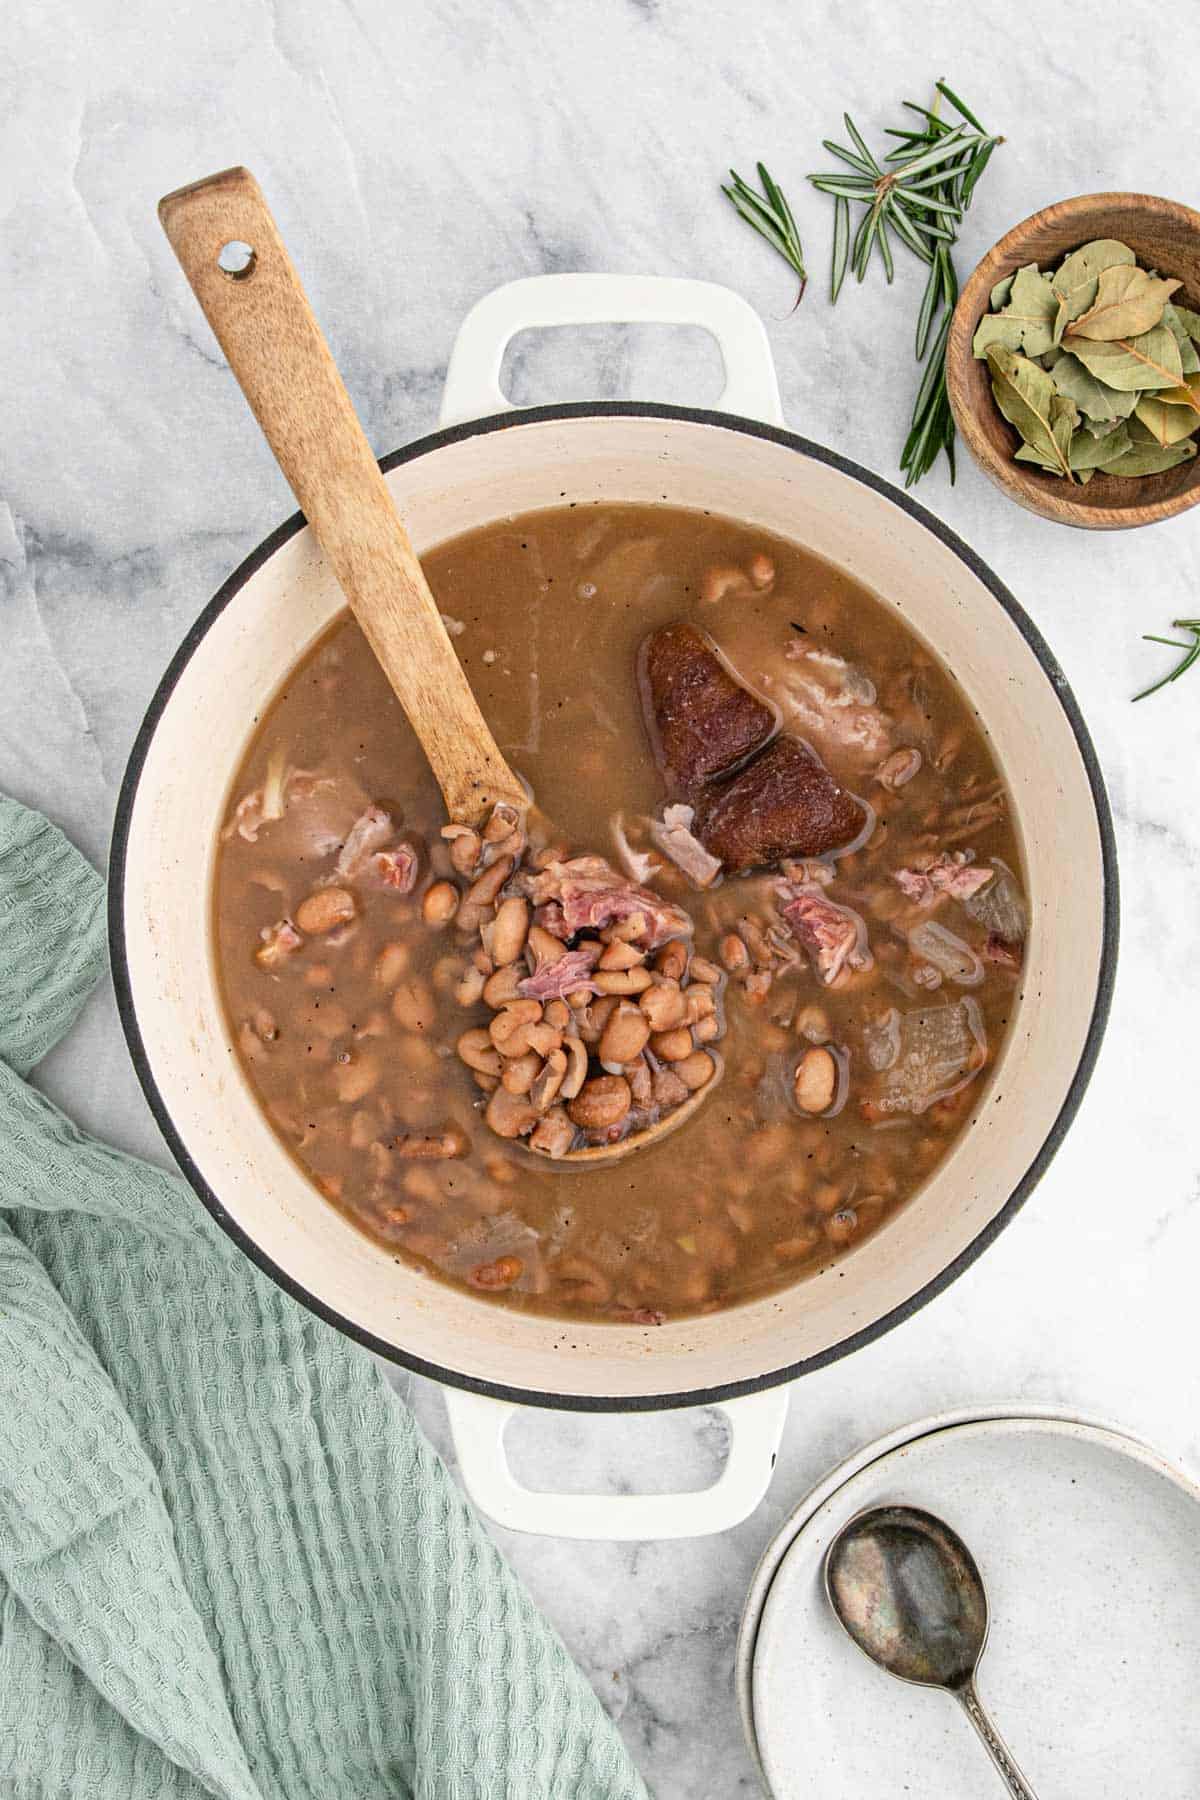 A pot of pinto beans on the table with a spoon lifting some up from the broth.